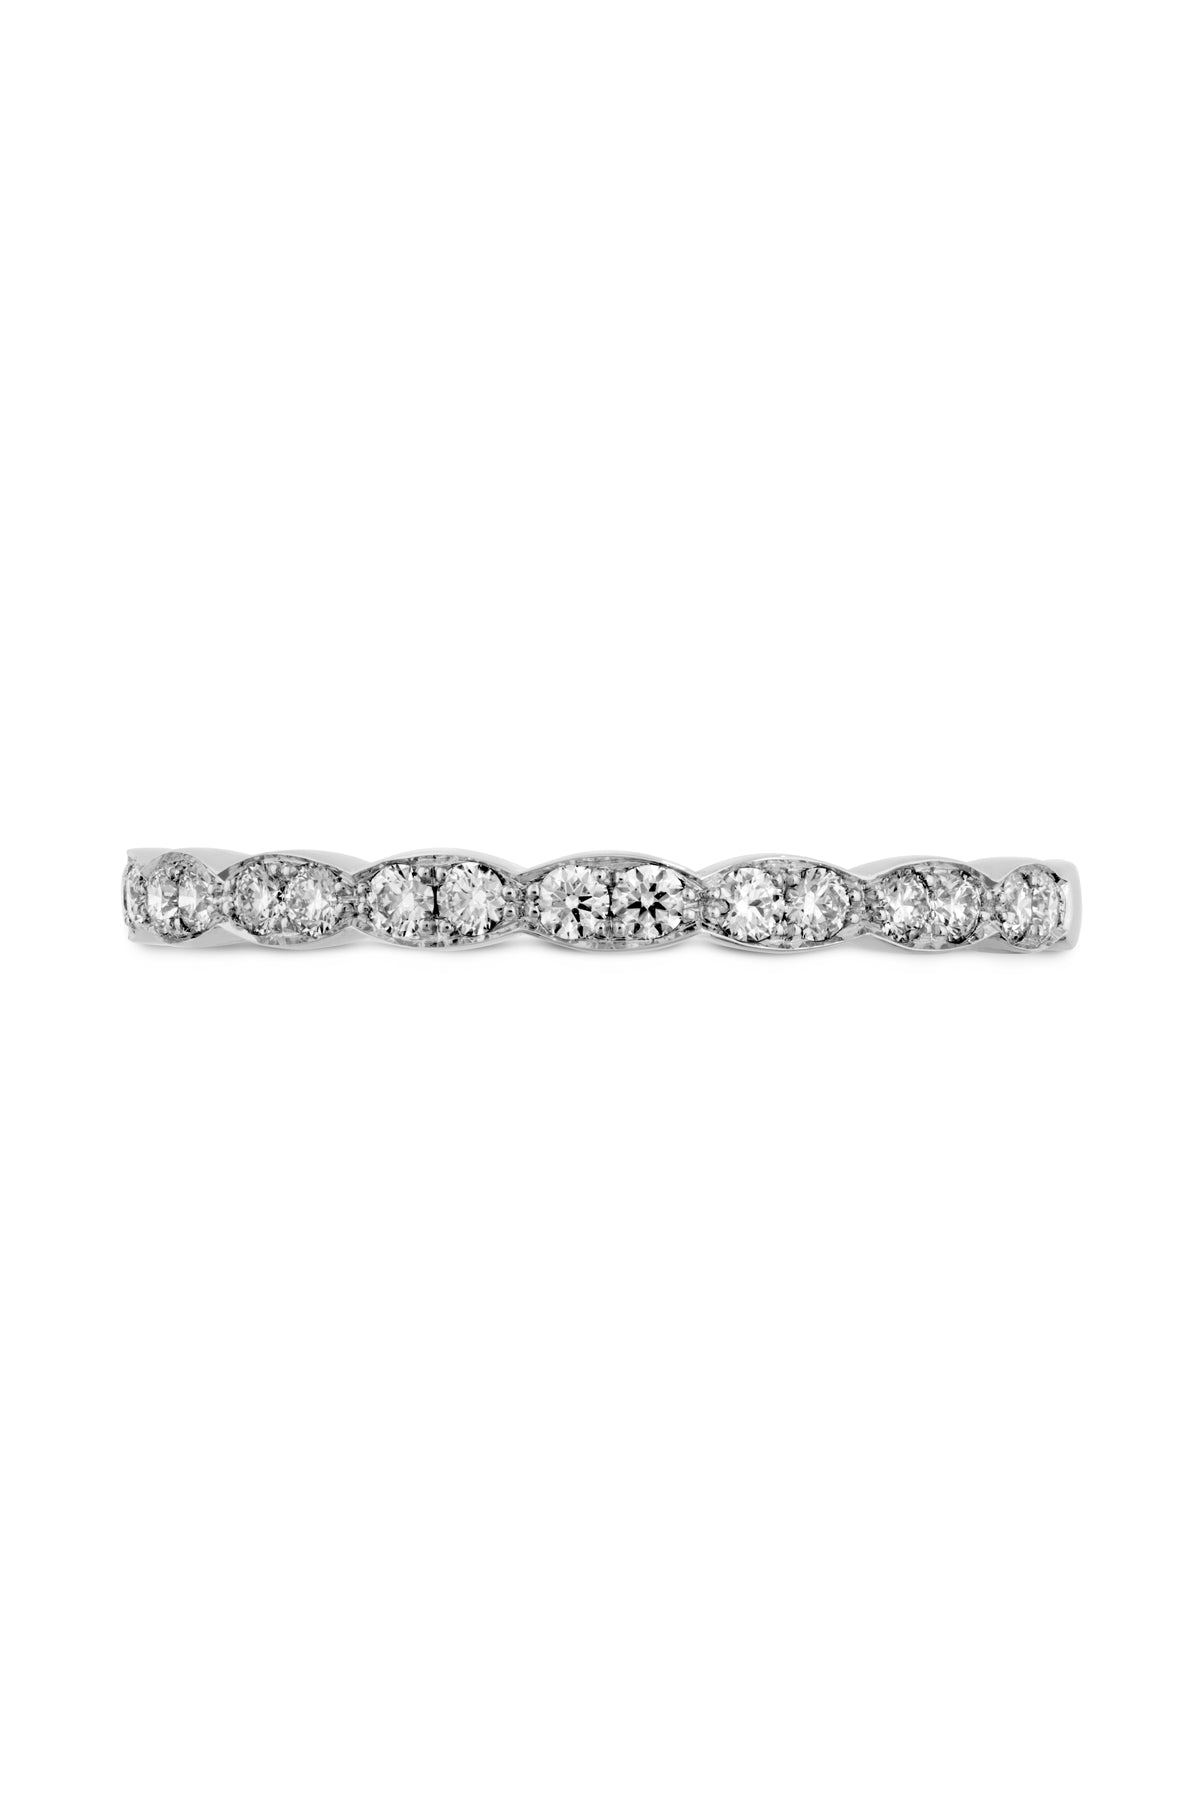 Lorelei Floral Diamond Band From Hearts On Fire available at LeGassick Diamonds and Jewellery Gold Coast, Australia.